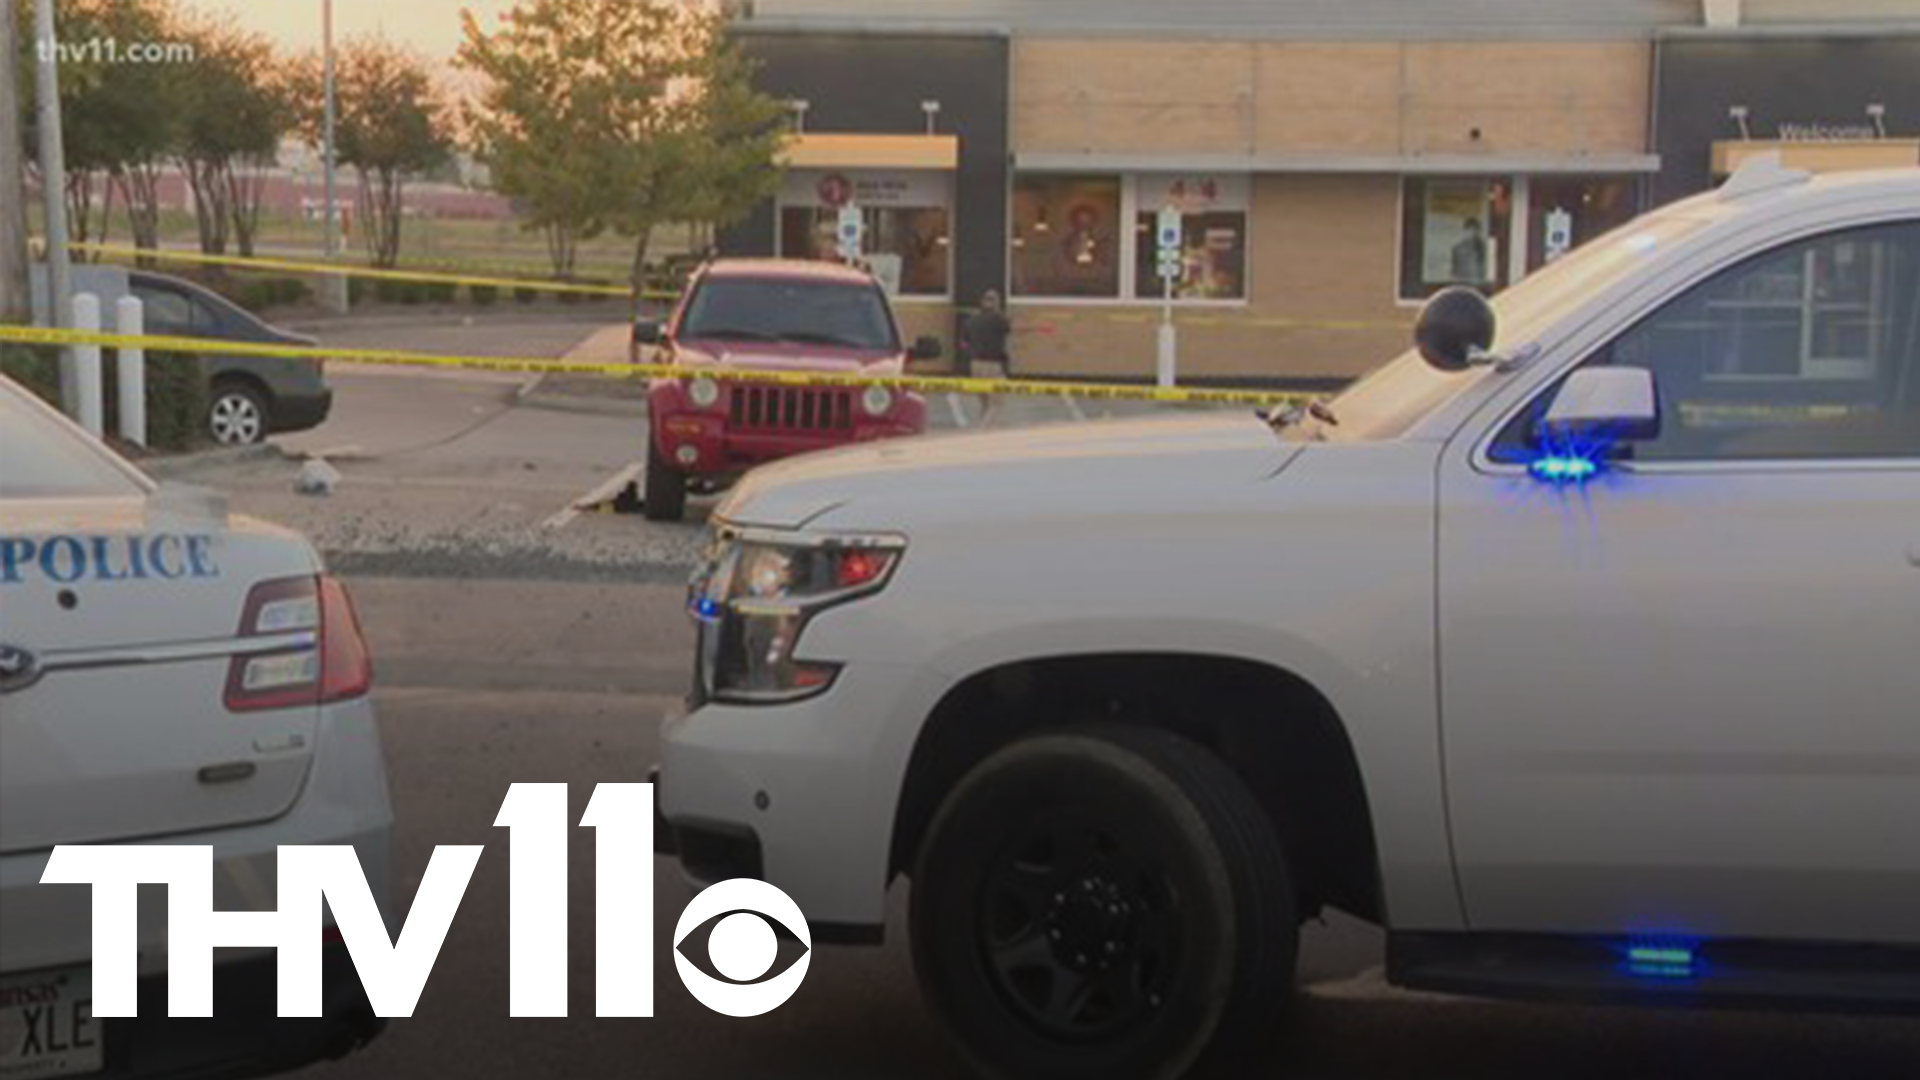 One person is dead and another injured after a shooting at the McDonald's on McCain Blvd. A COVID vaccine for kids isn't welcomed by all Arkansas parents.